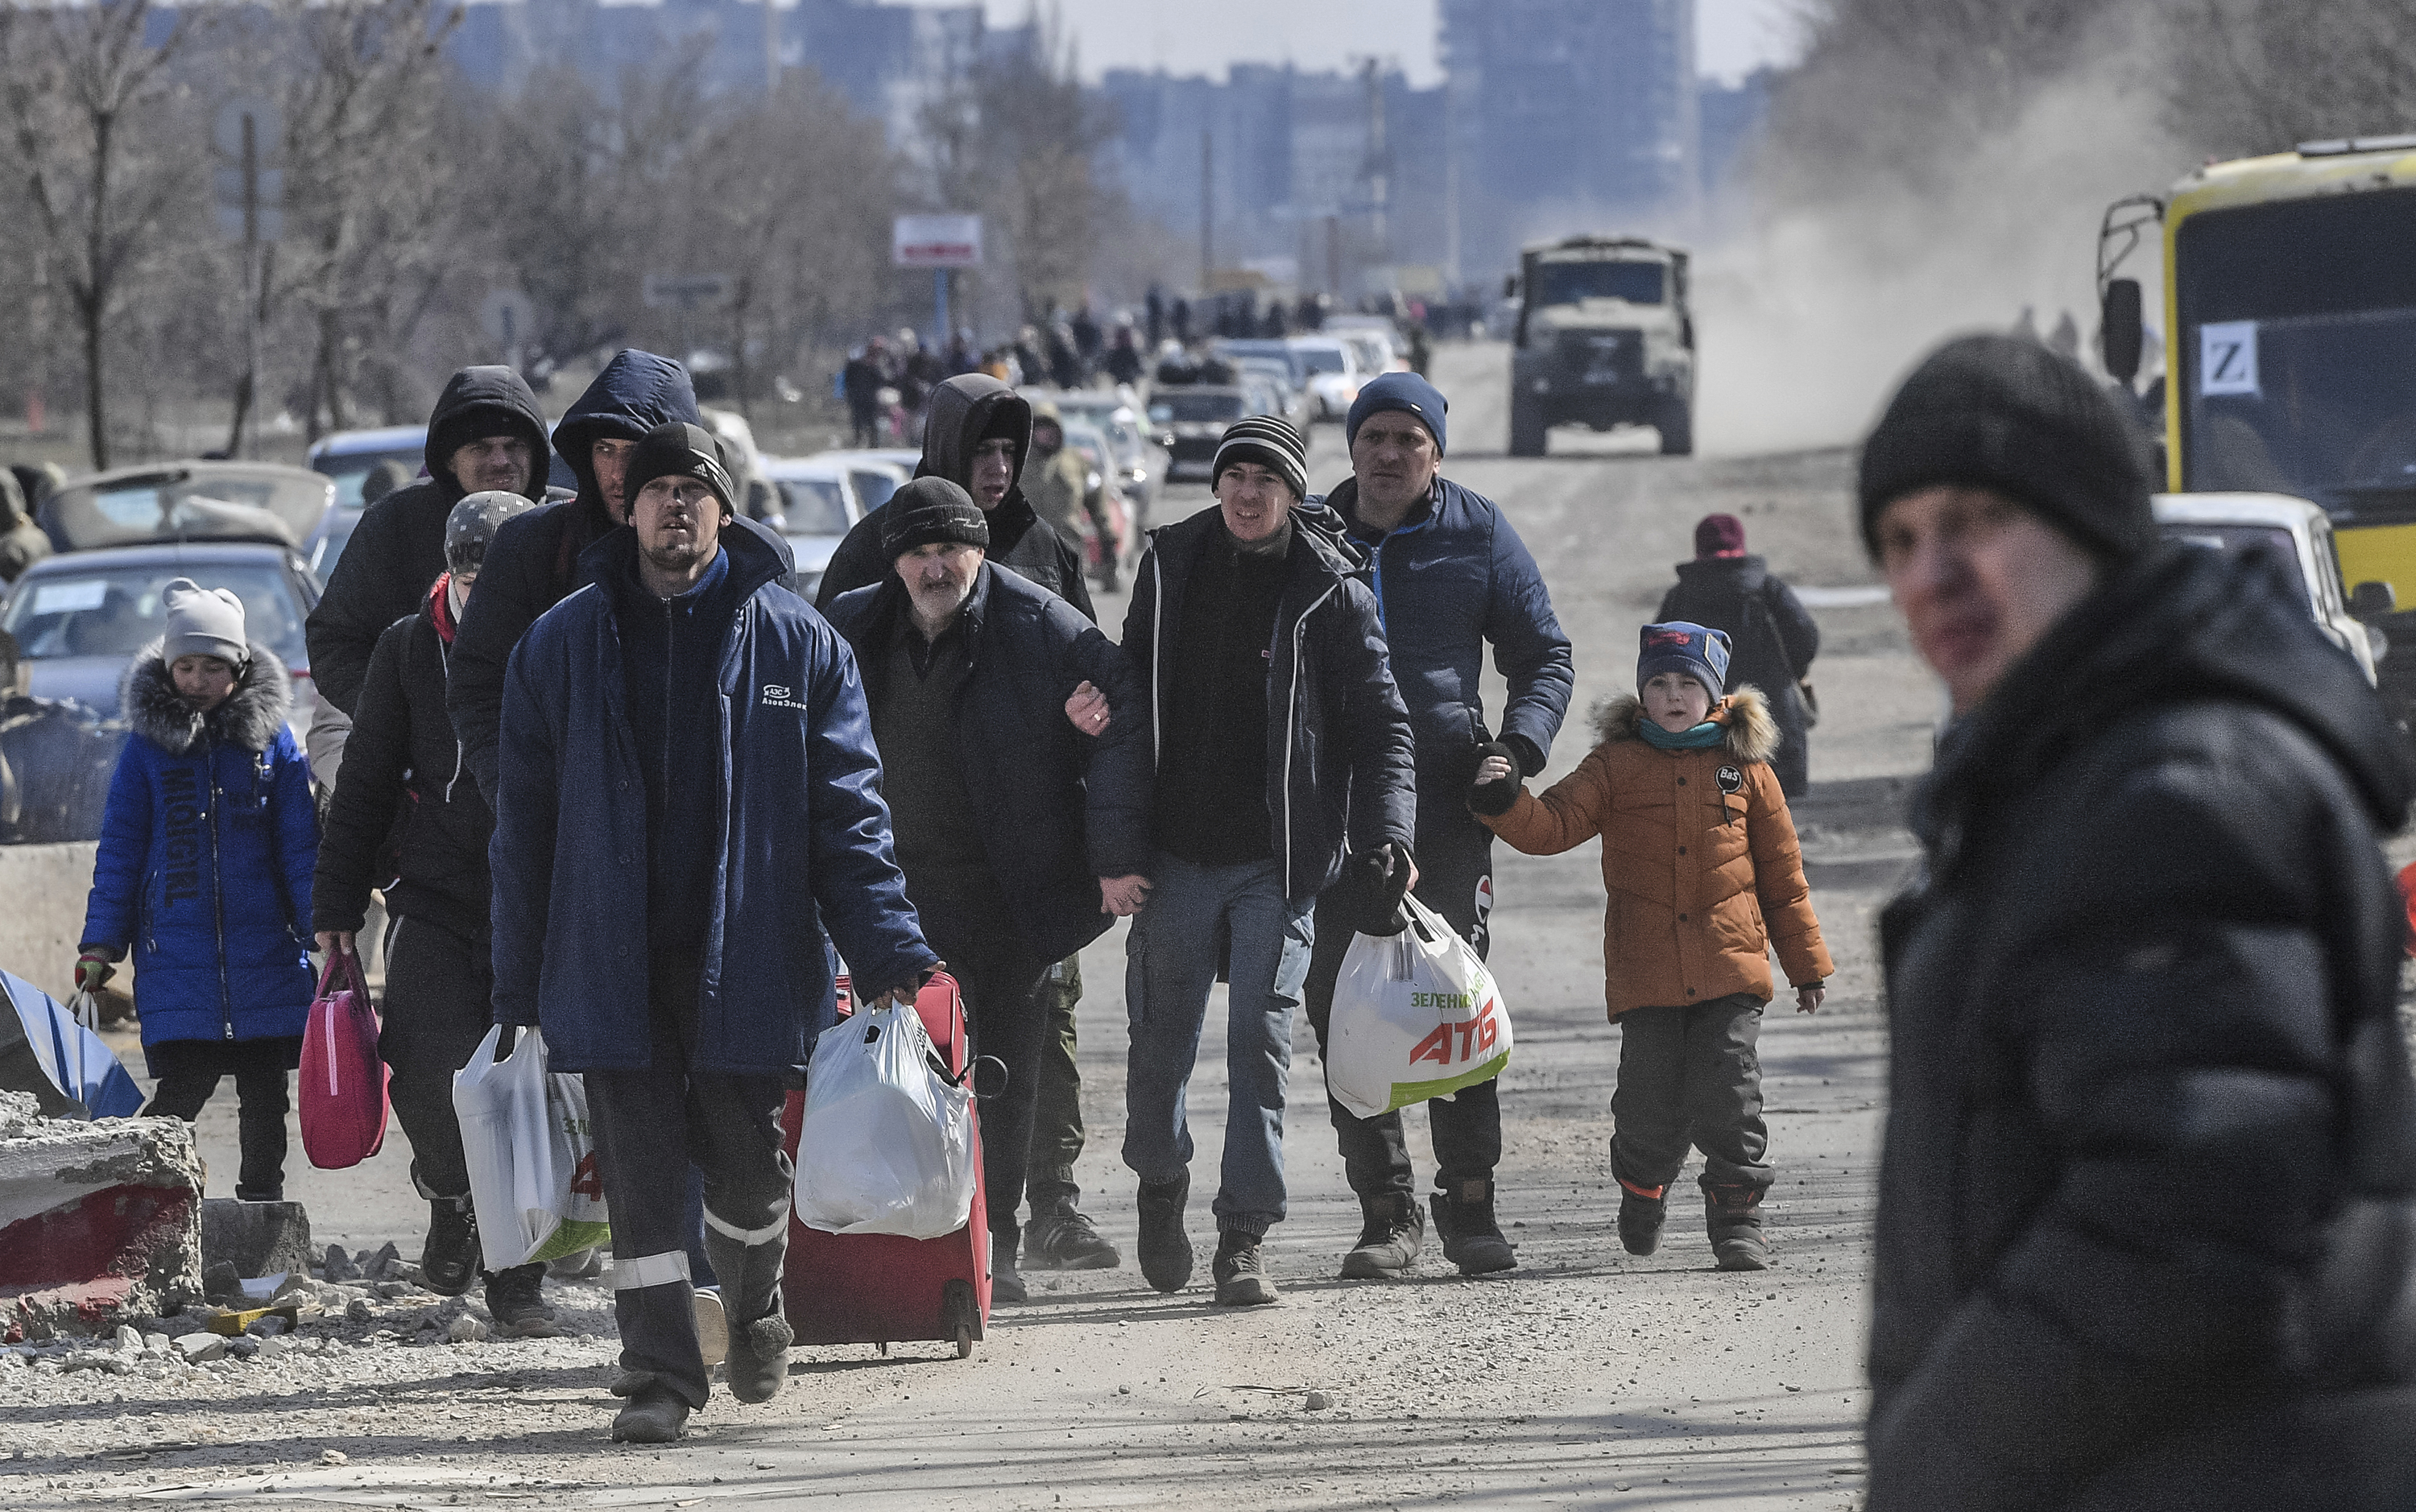 Residents leave the city of Mariupol on March 18. The city has been a site of intense fighting in recent weeks.